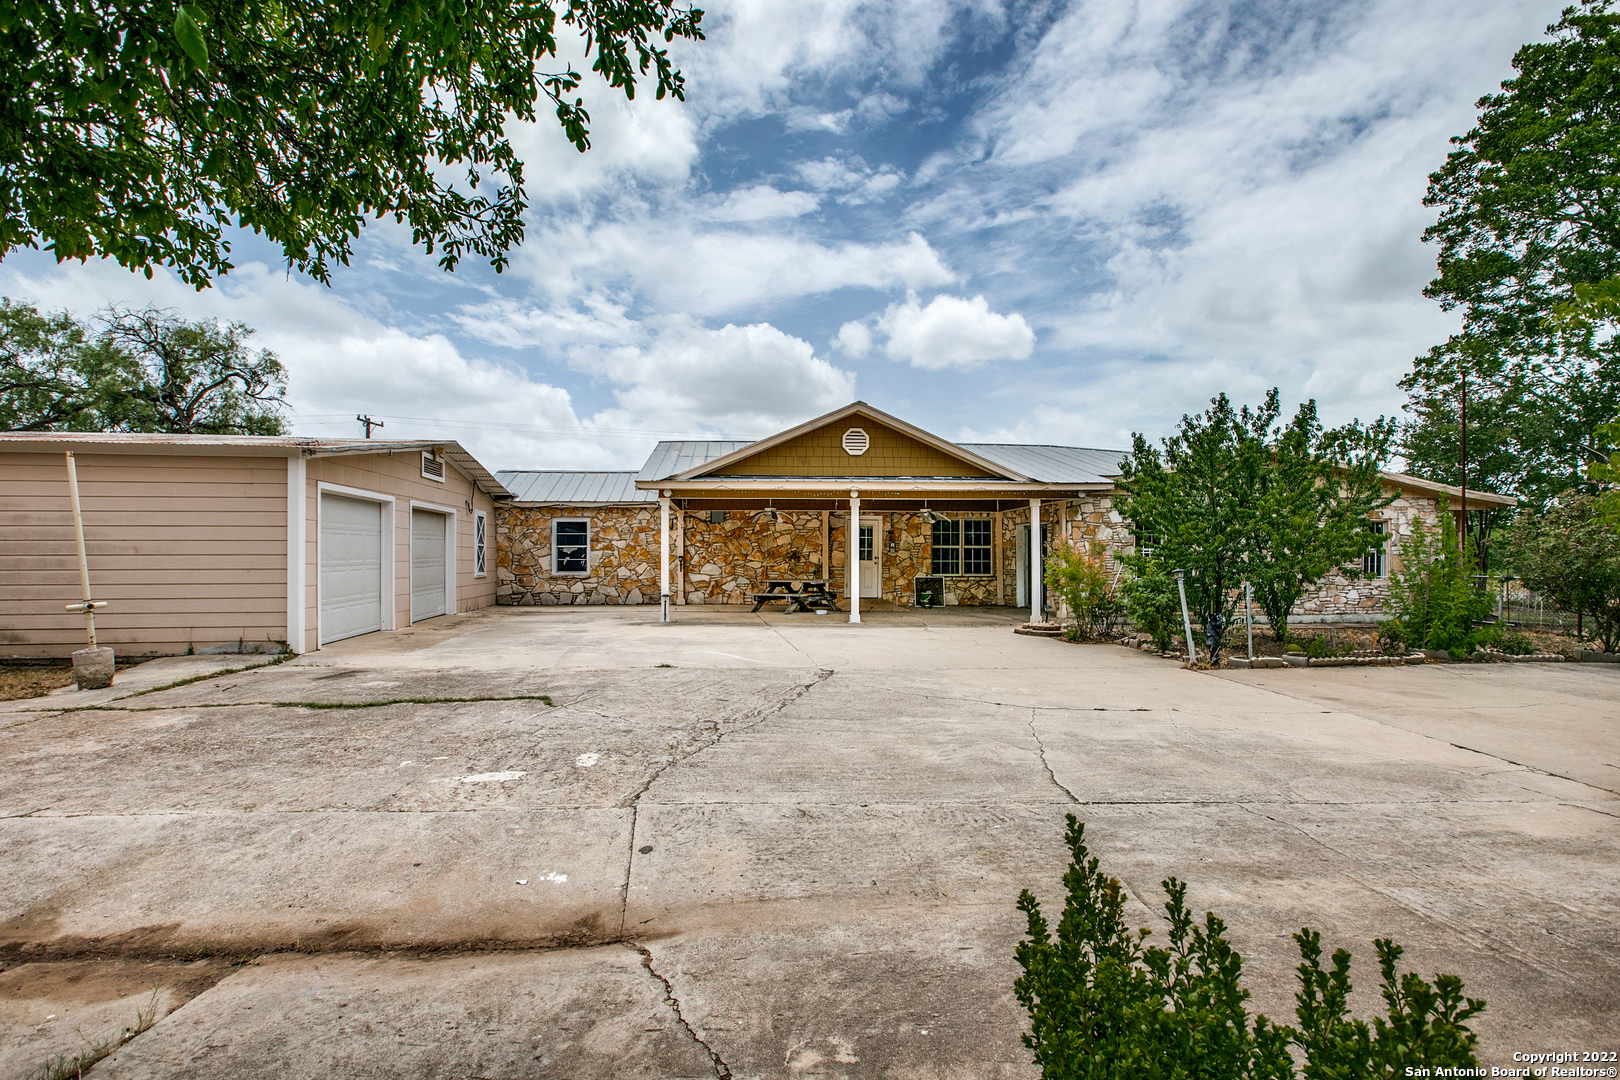 PRIME corner residential home on .71 acres, in a very desirable location in the Southside of San Antonio. This home needs some lots of updates, but plenty of room to make as home/office and plenty of parking! Currently zoned residential, but can be zoned commercial.  Recommend contacting Bexar County zoning division to see if it can be zoned for your business.  Fenced was removed dividing 9756 & 9758 Southton allowing owners to walk to work (restaurant building for sale as well).  Not many corner lots become available with this type of potential for home owners or business owners.  Just minutes away from HWY 410, with easy access to Brooks City Base, 281 N, 37 South, Texas A&M San Antonio, restaurants, retail and much more.